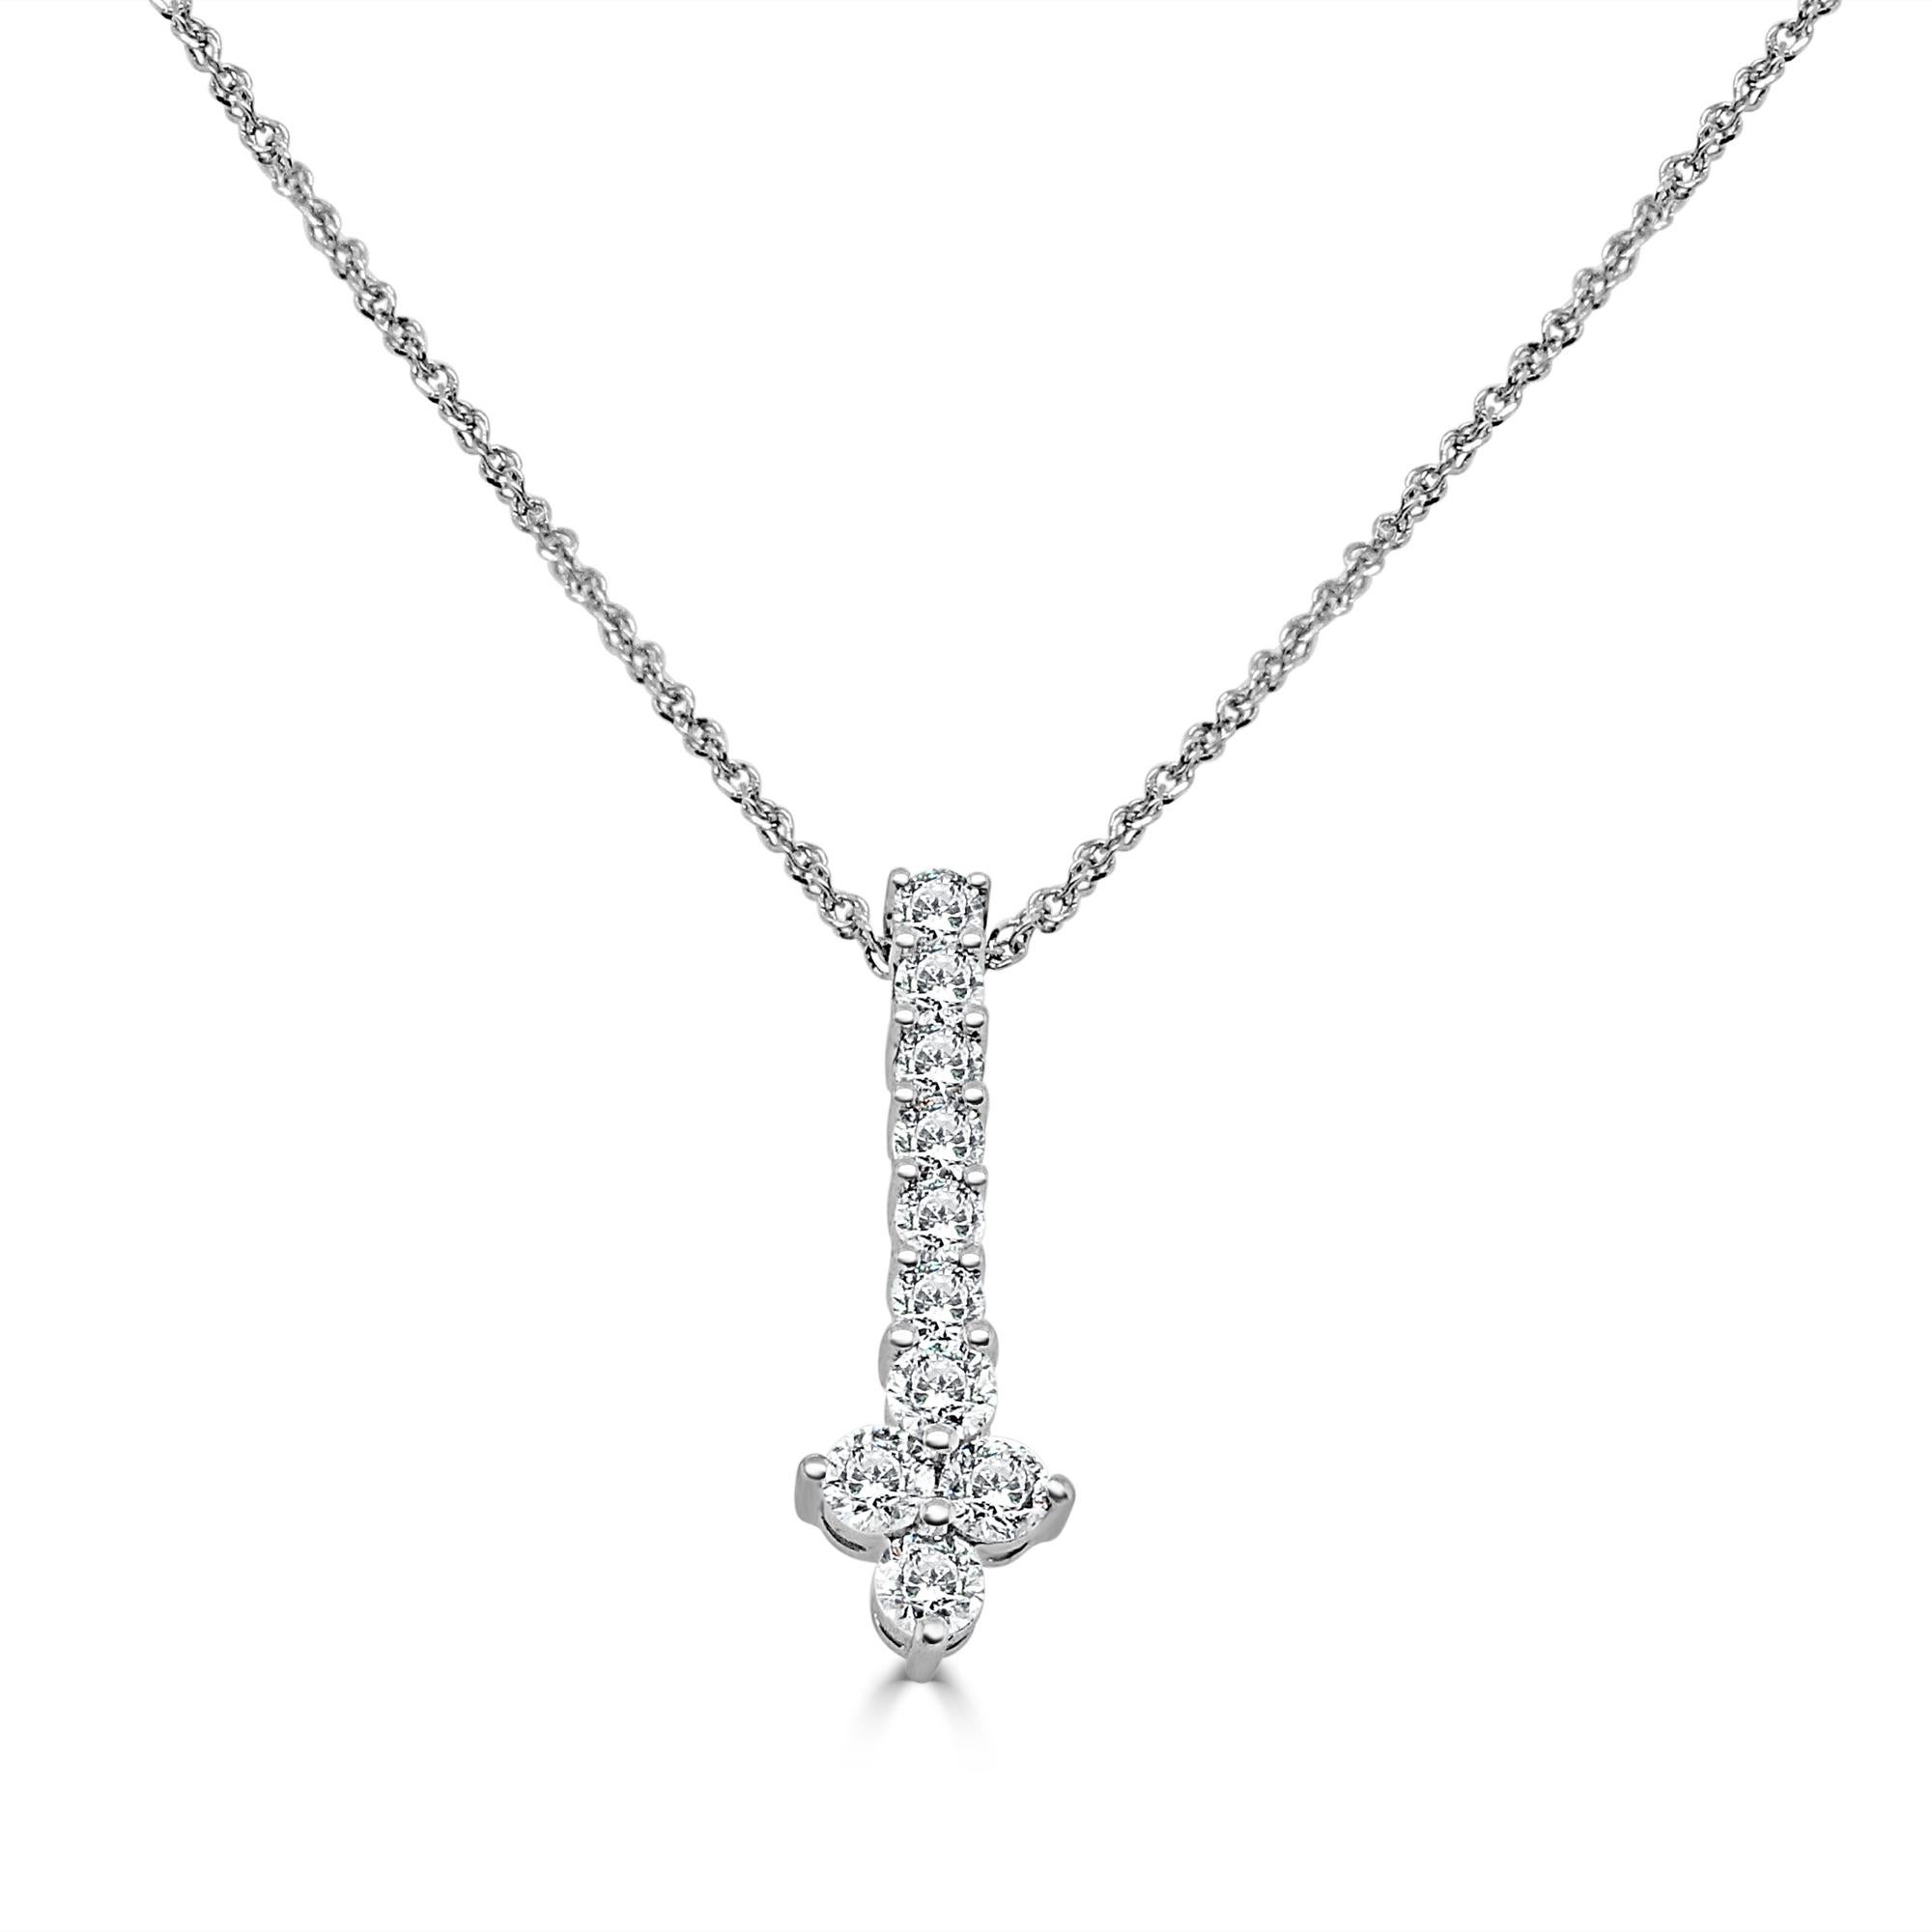 18 Karat White Gold 0.53 Carat Diamond Chain Necklace Wedding Fine Jewelry 

Gentle and elegant pendant is crafted in a sleek white gold. Featuring round cut diamonds, together totaling 0.53 TCW . Suspended from a 16-inch stunning non-tangle, non